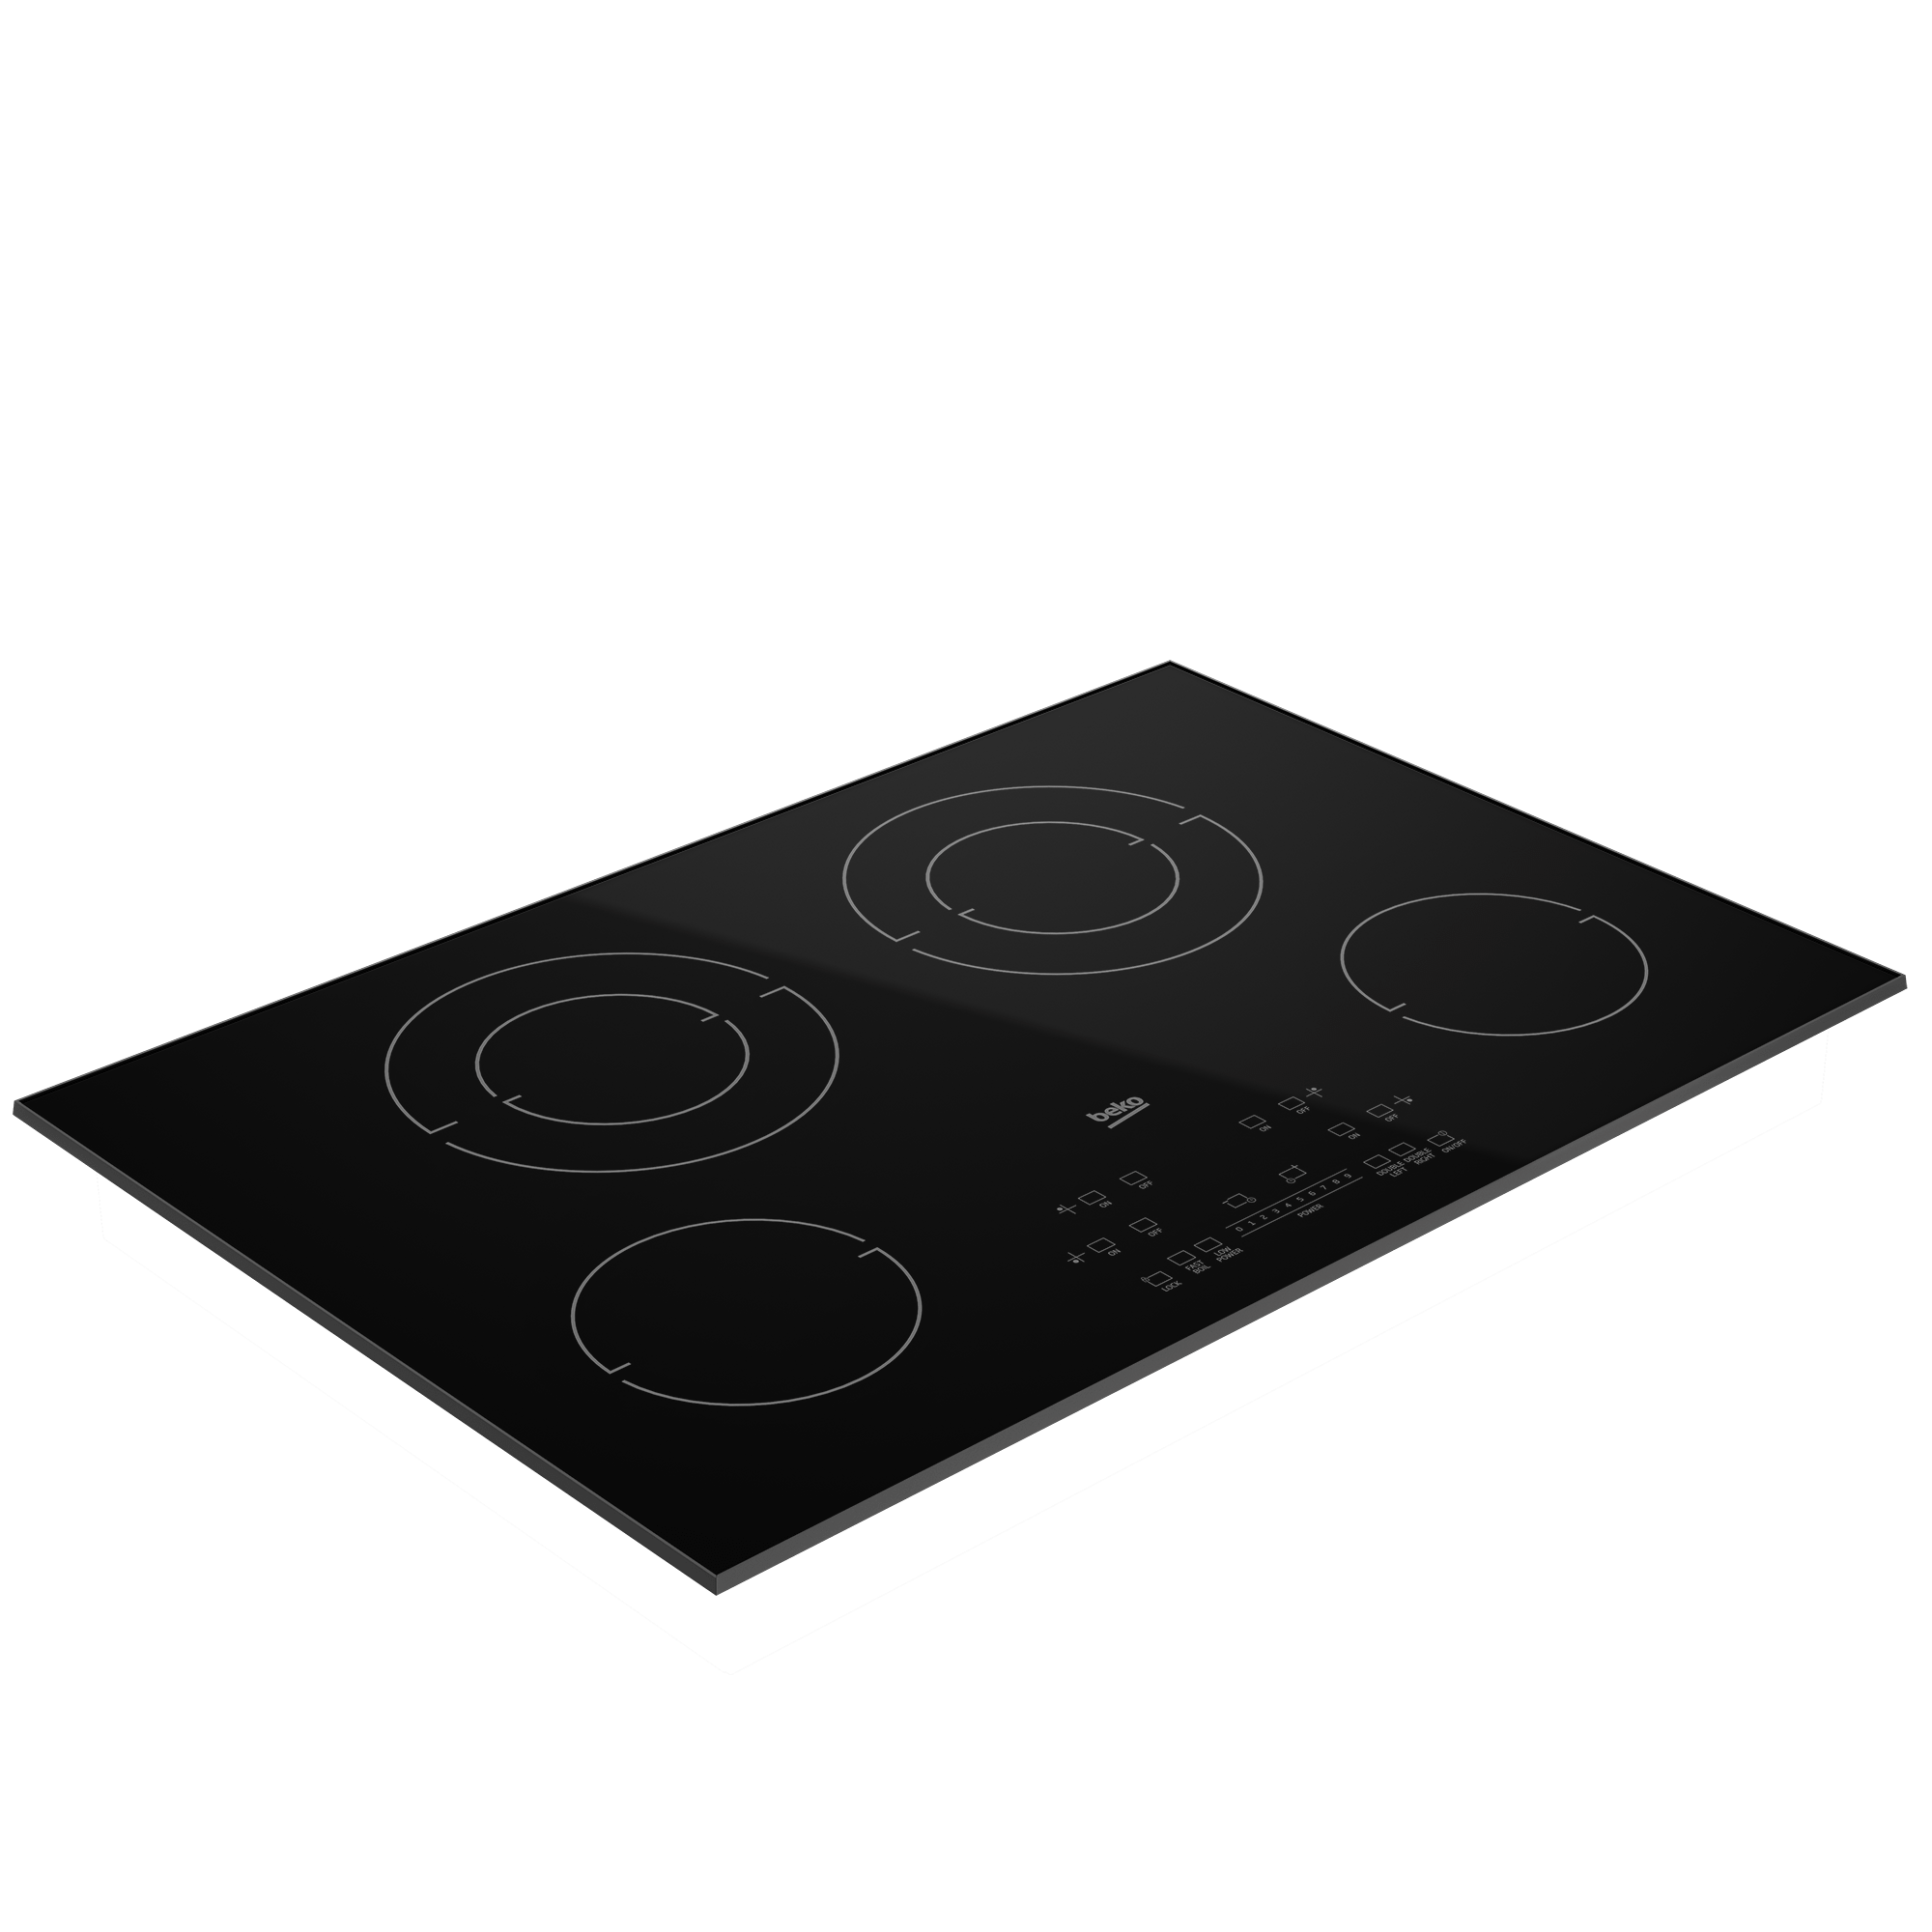 Beko 30" Built-In Electric Cooktop with 4 Burners and Touch Control